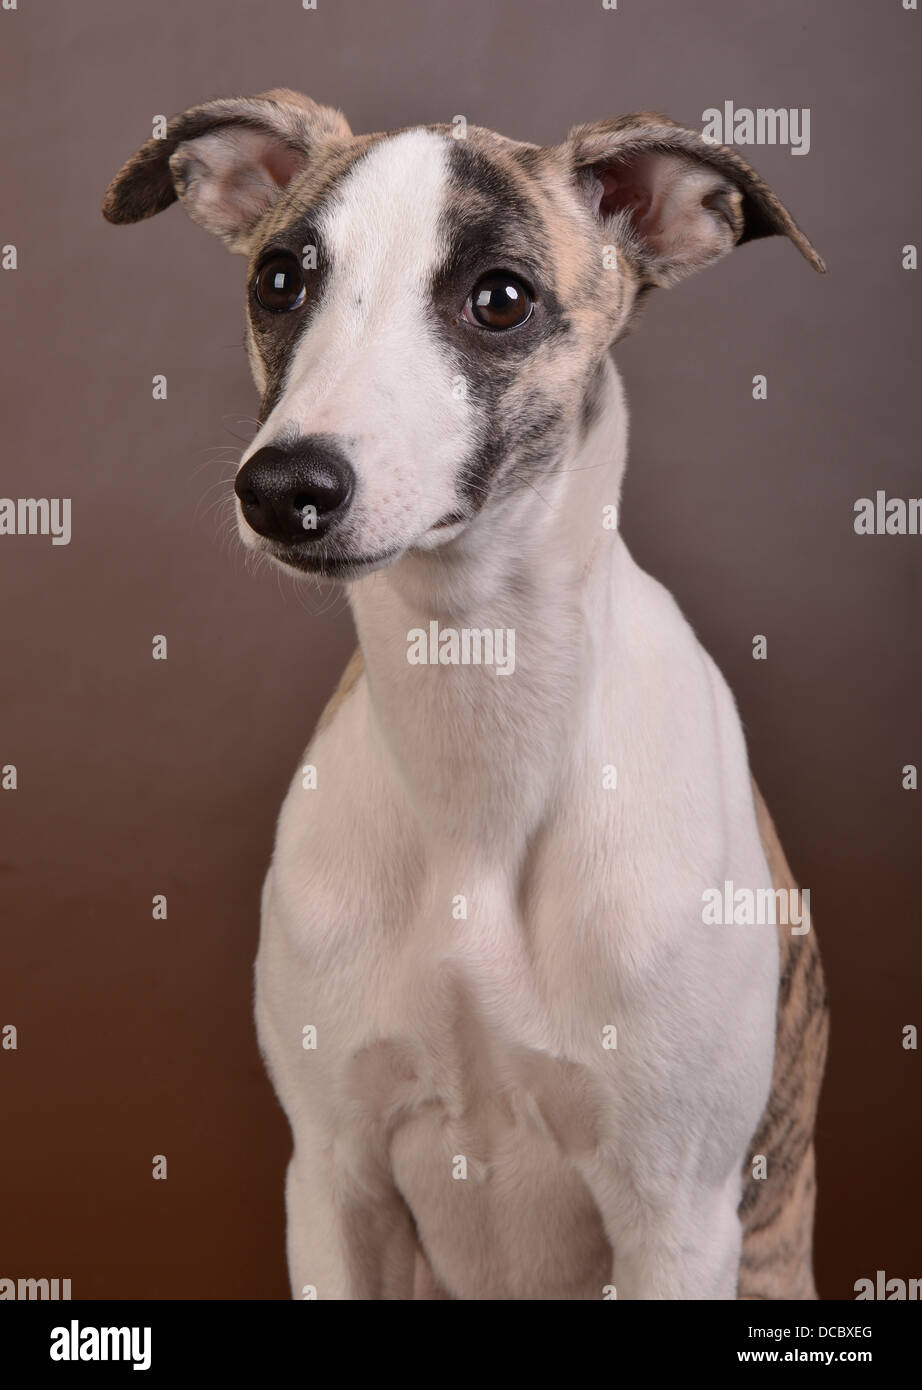 dog, pet, cute, studio, animal, white, young, domestic, portrait, happy, isolated, canine, adorable, background, puppy, funny, beautiful, mammal, bree Stock Photo